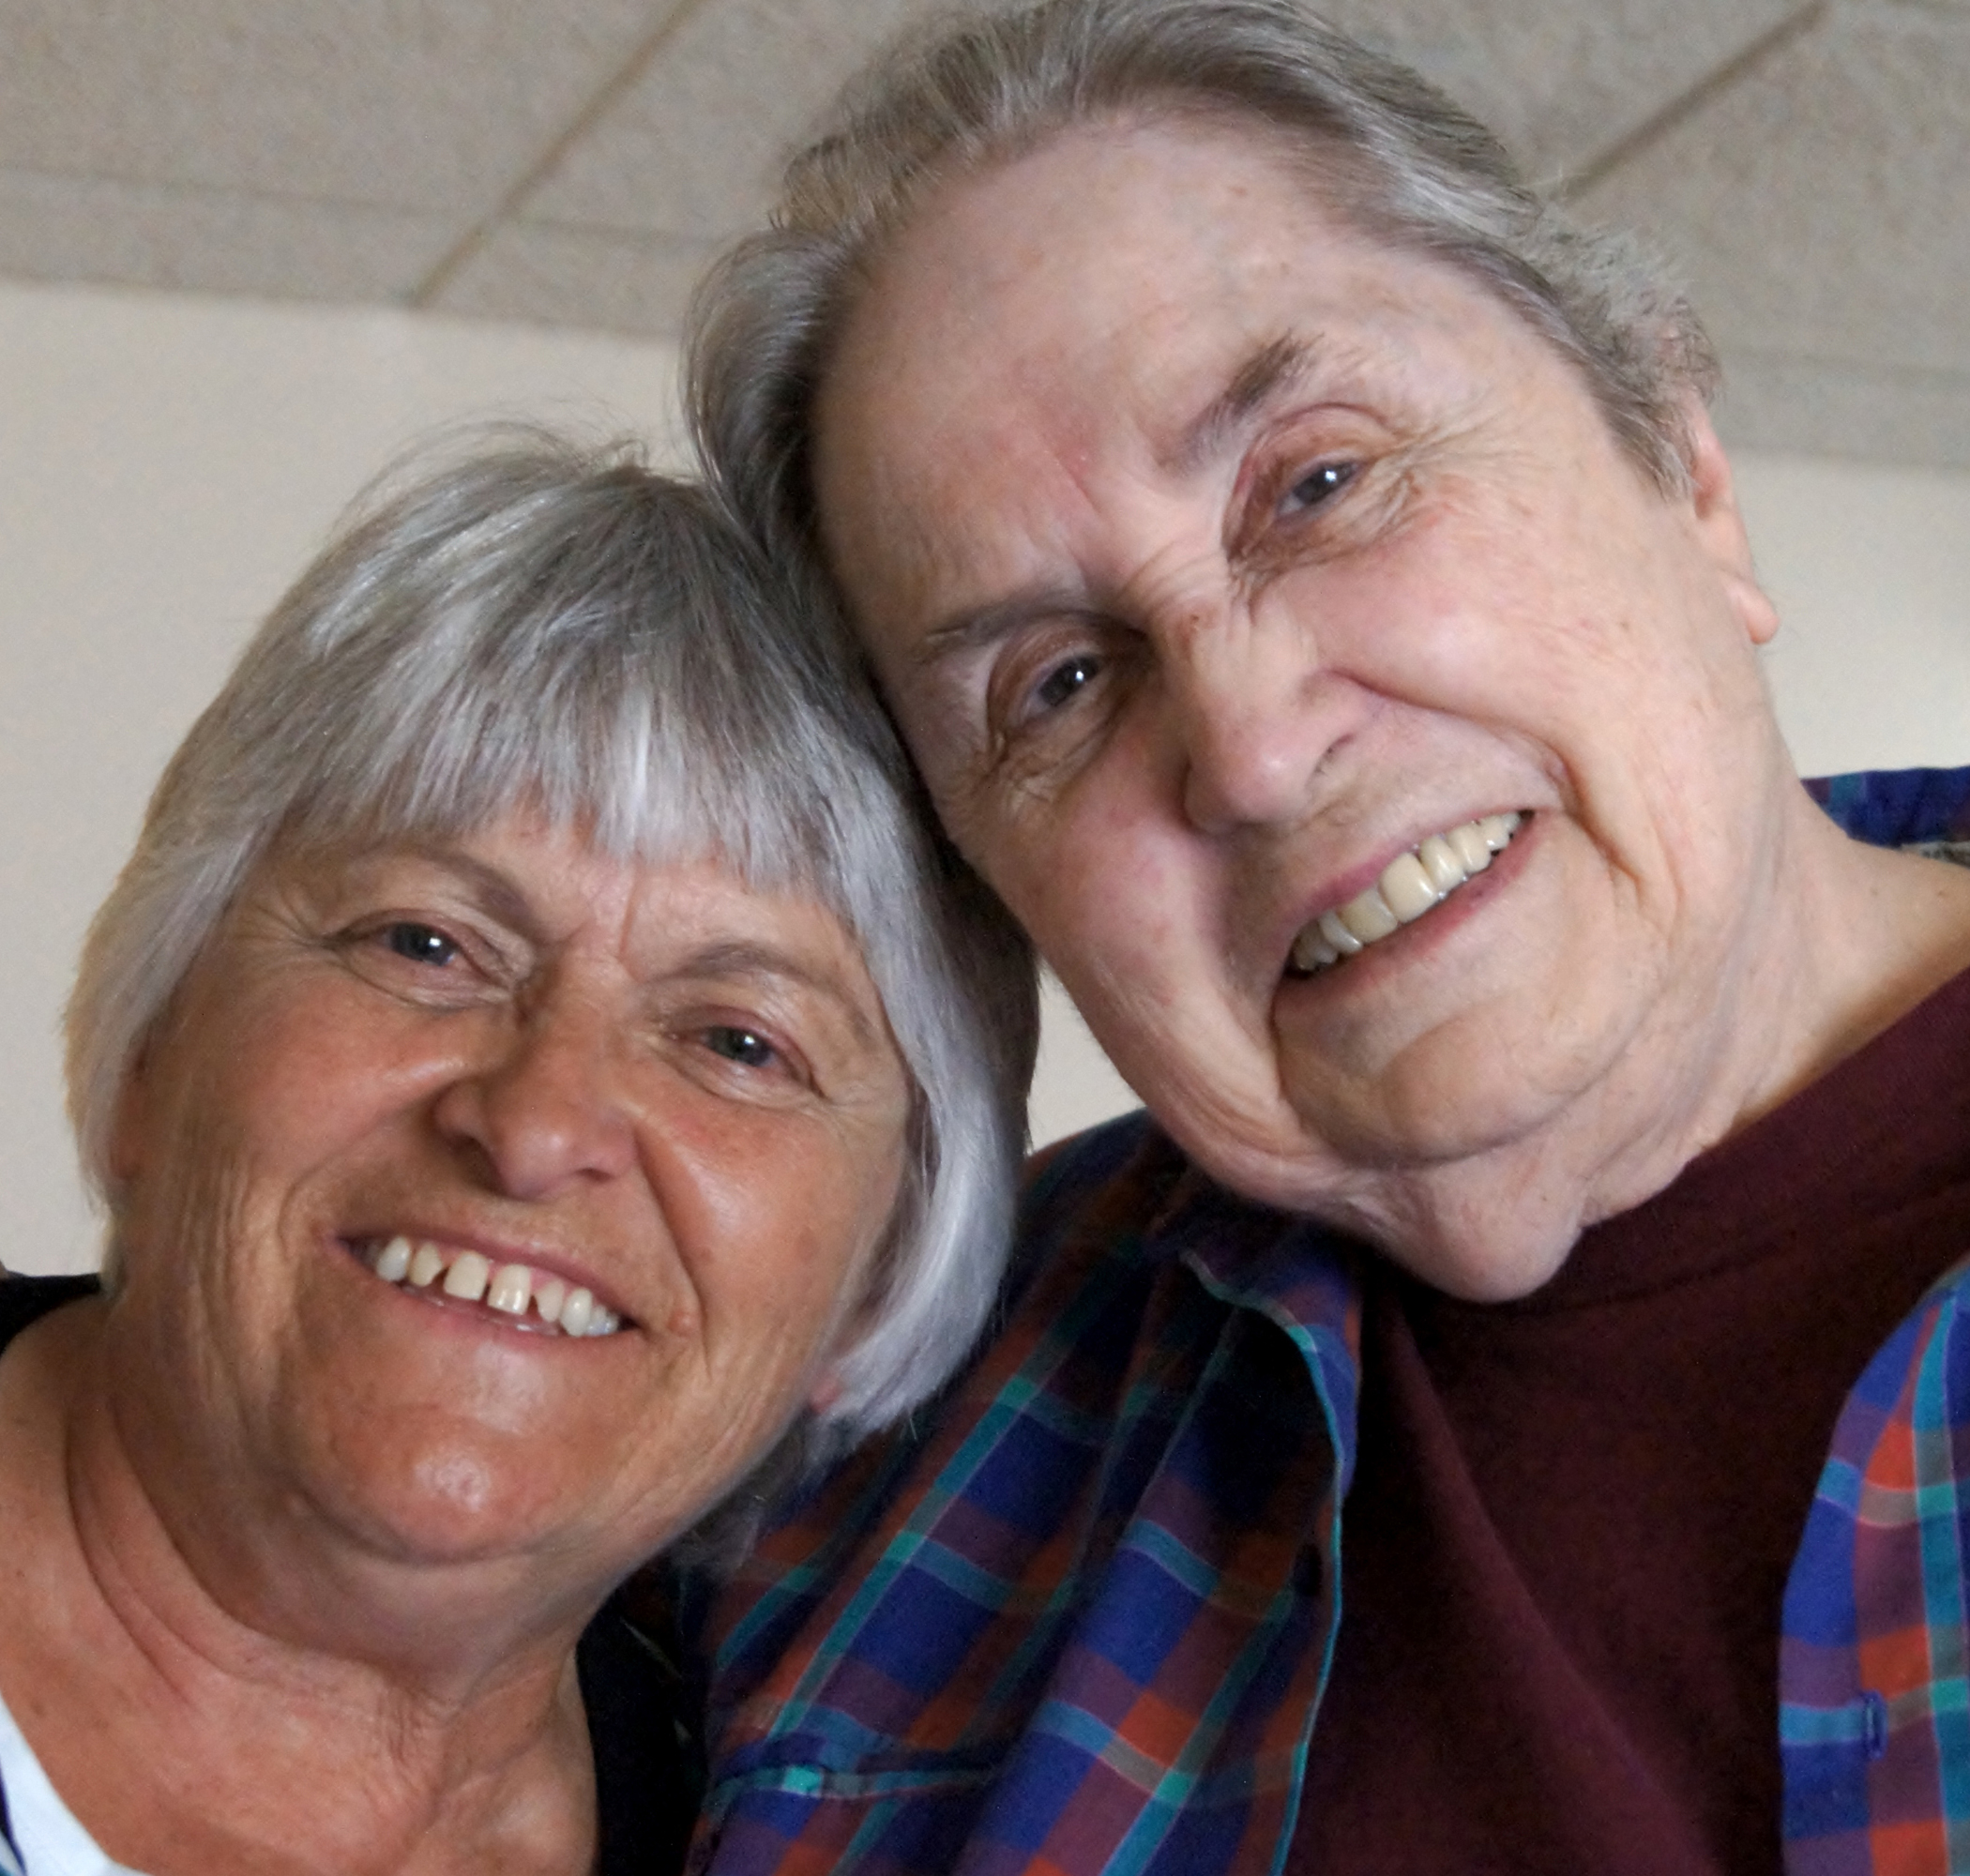 Associate (now Postulant) Jayne Erickson became fast friends with +Sister Agnes Alich and filled her last months with joy.